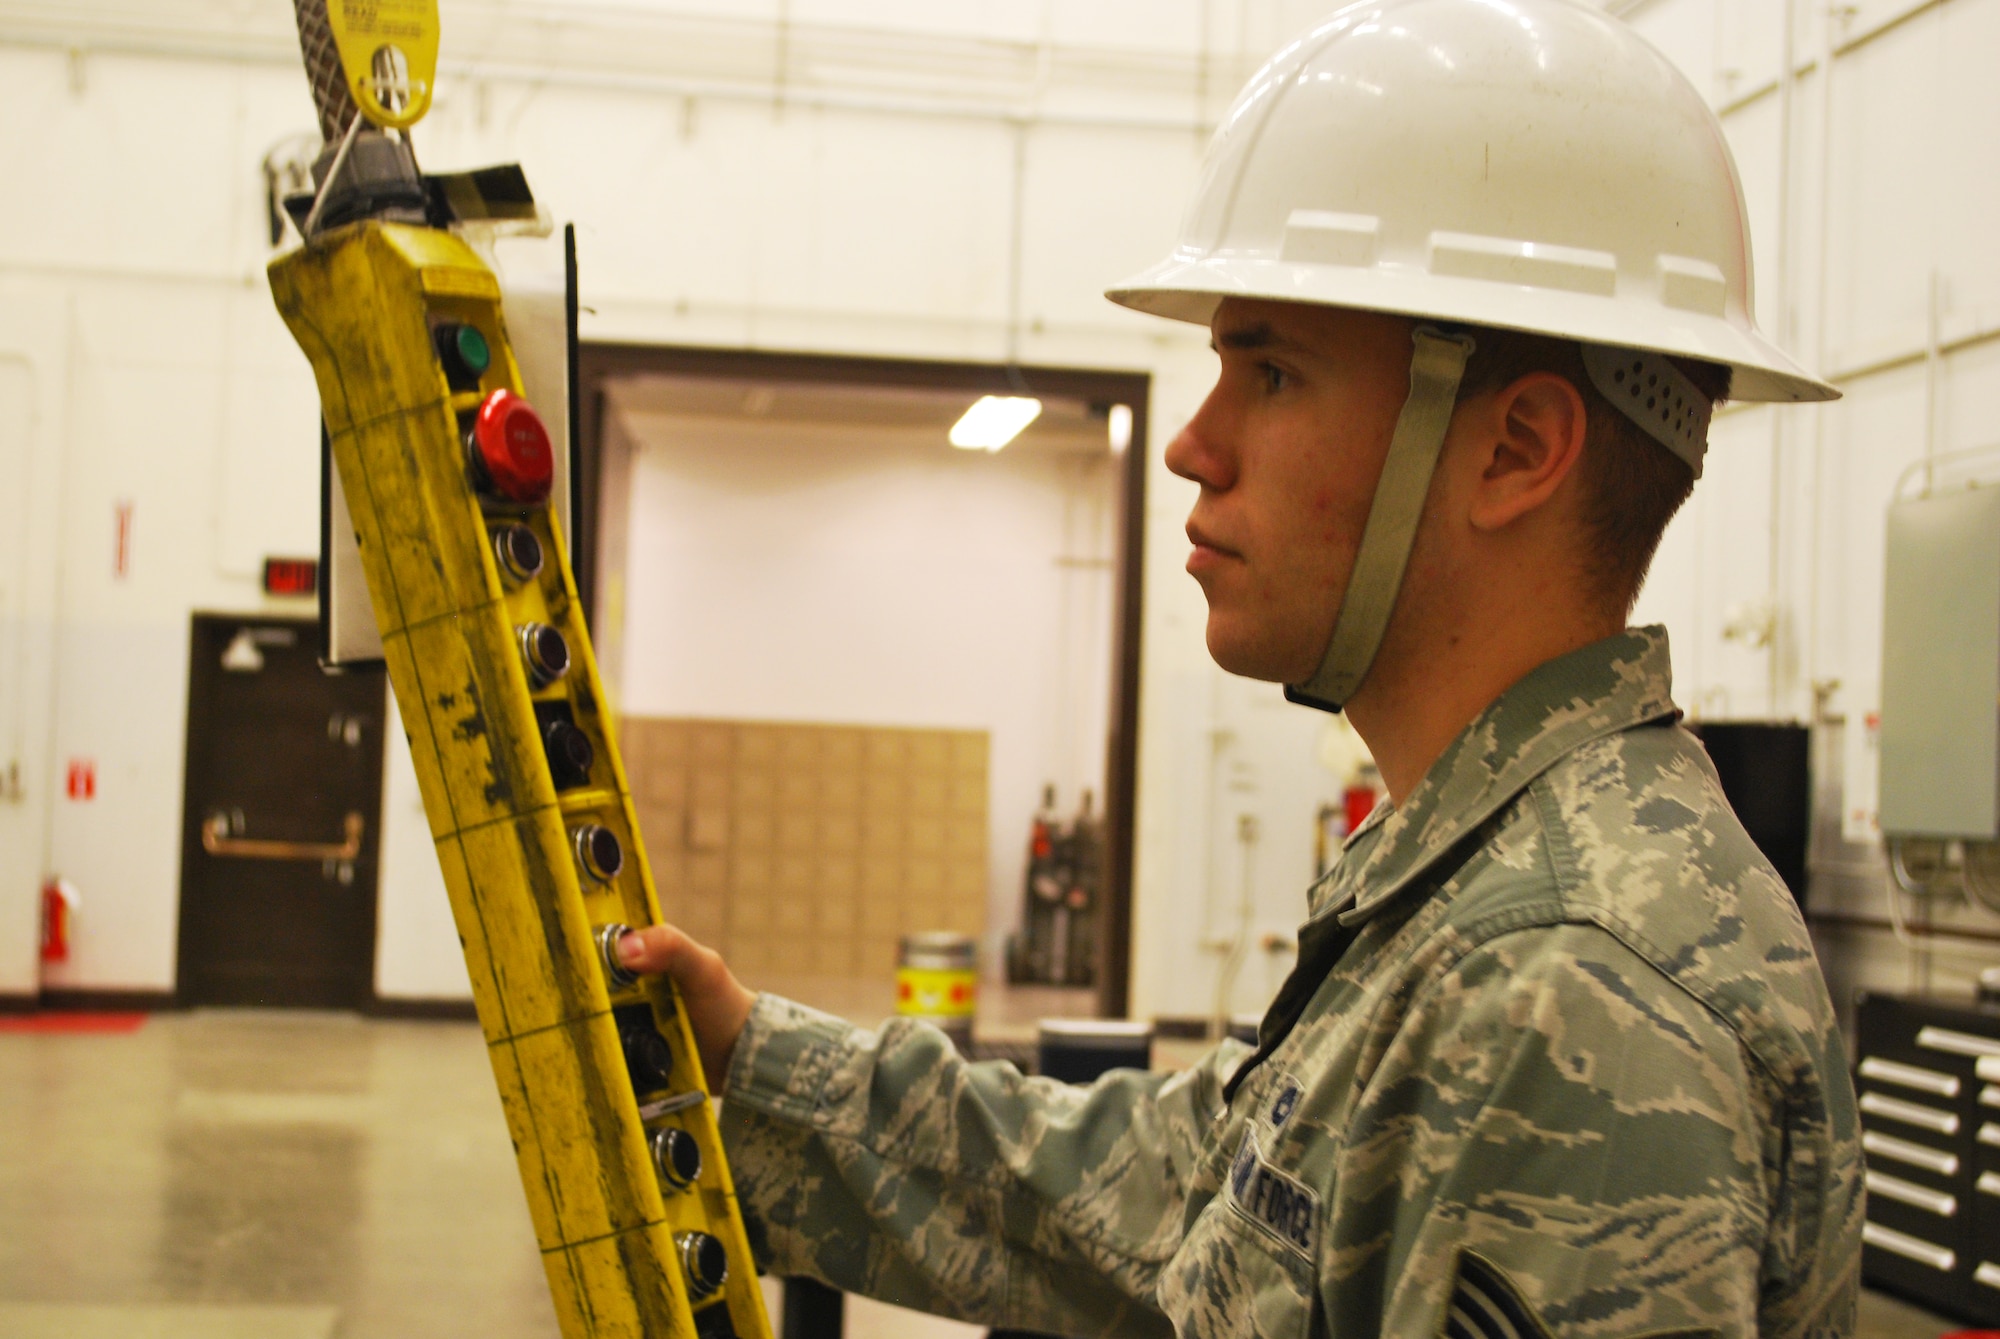 Senior Airman Justin Ford, 341st Munitions Squadron technician, operates a hoist during a training session at Malmstrom Air Force Base Aug. 21. During the 2014 Global Strike Challenge, Malmstrom’s 341st MUNS team will transfer, install and troubleshoot a Mark 12A missile assembly (U.S. Air Force photo/Airman 1st Class Collin Schmidt)